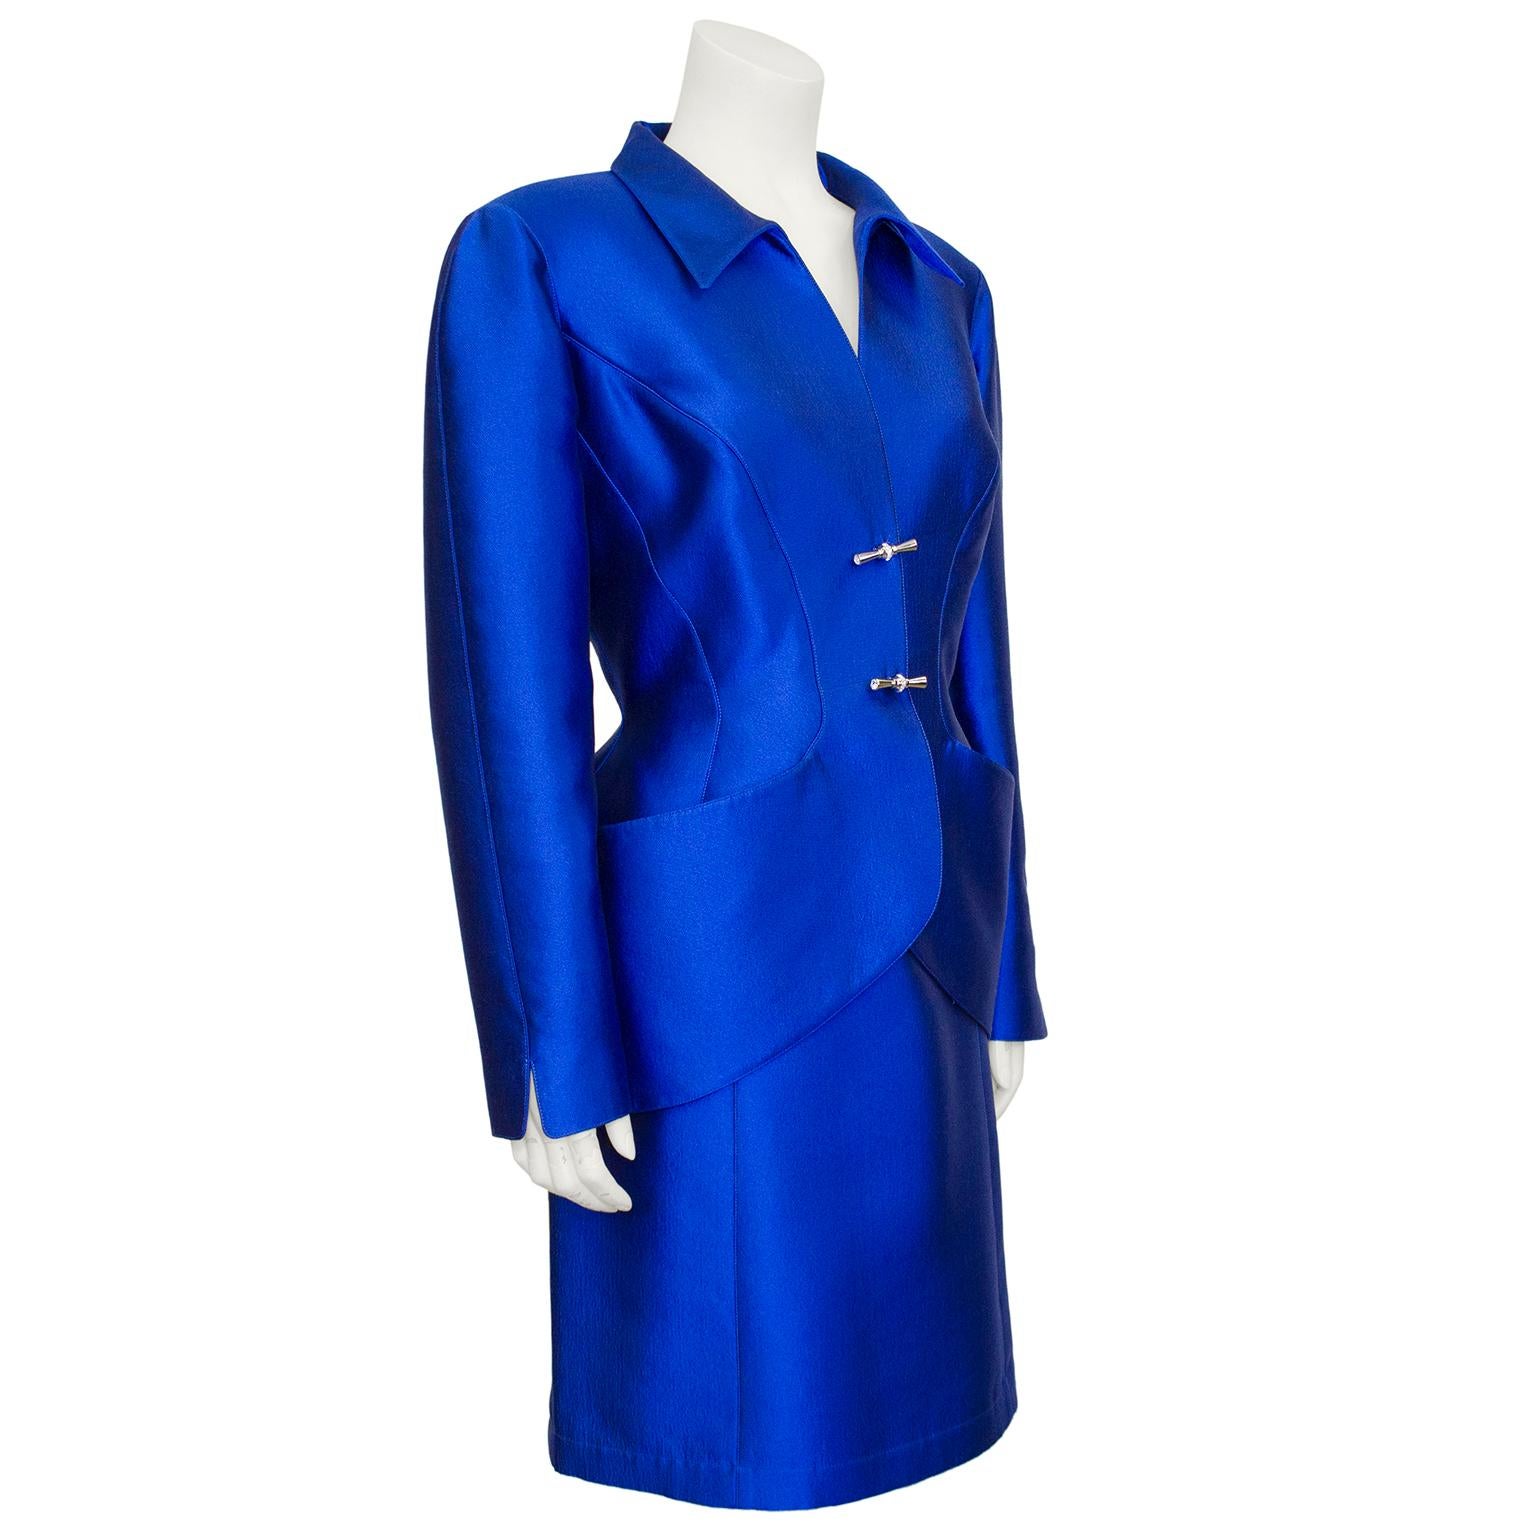 Thierry Mugler was known for his avant-garde and architectural, yet hyper-feminine designs, and this 1990s skirt suit is no exception. Crafted from a metallic royal blue wool silk blend, this suit is fabulous worn together, but the individual pieces